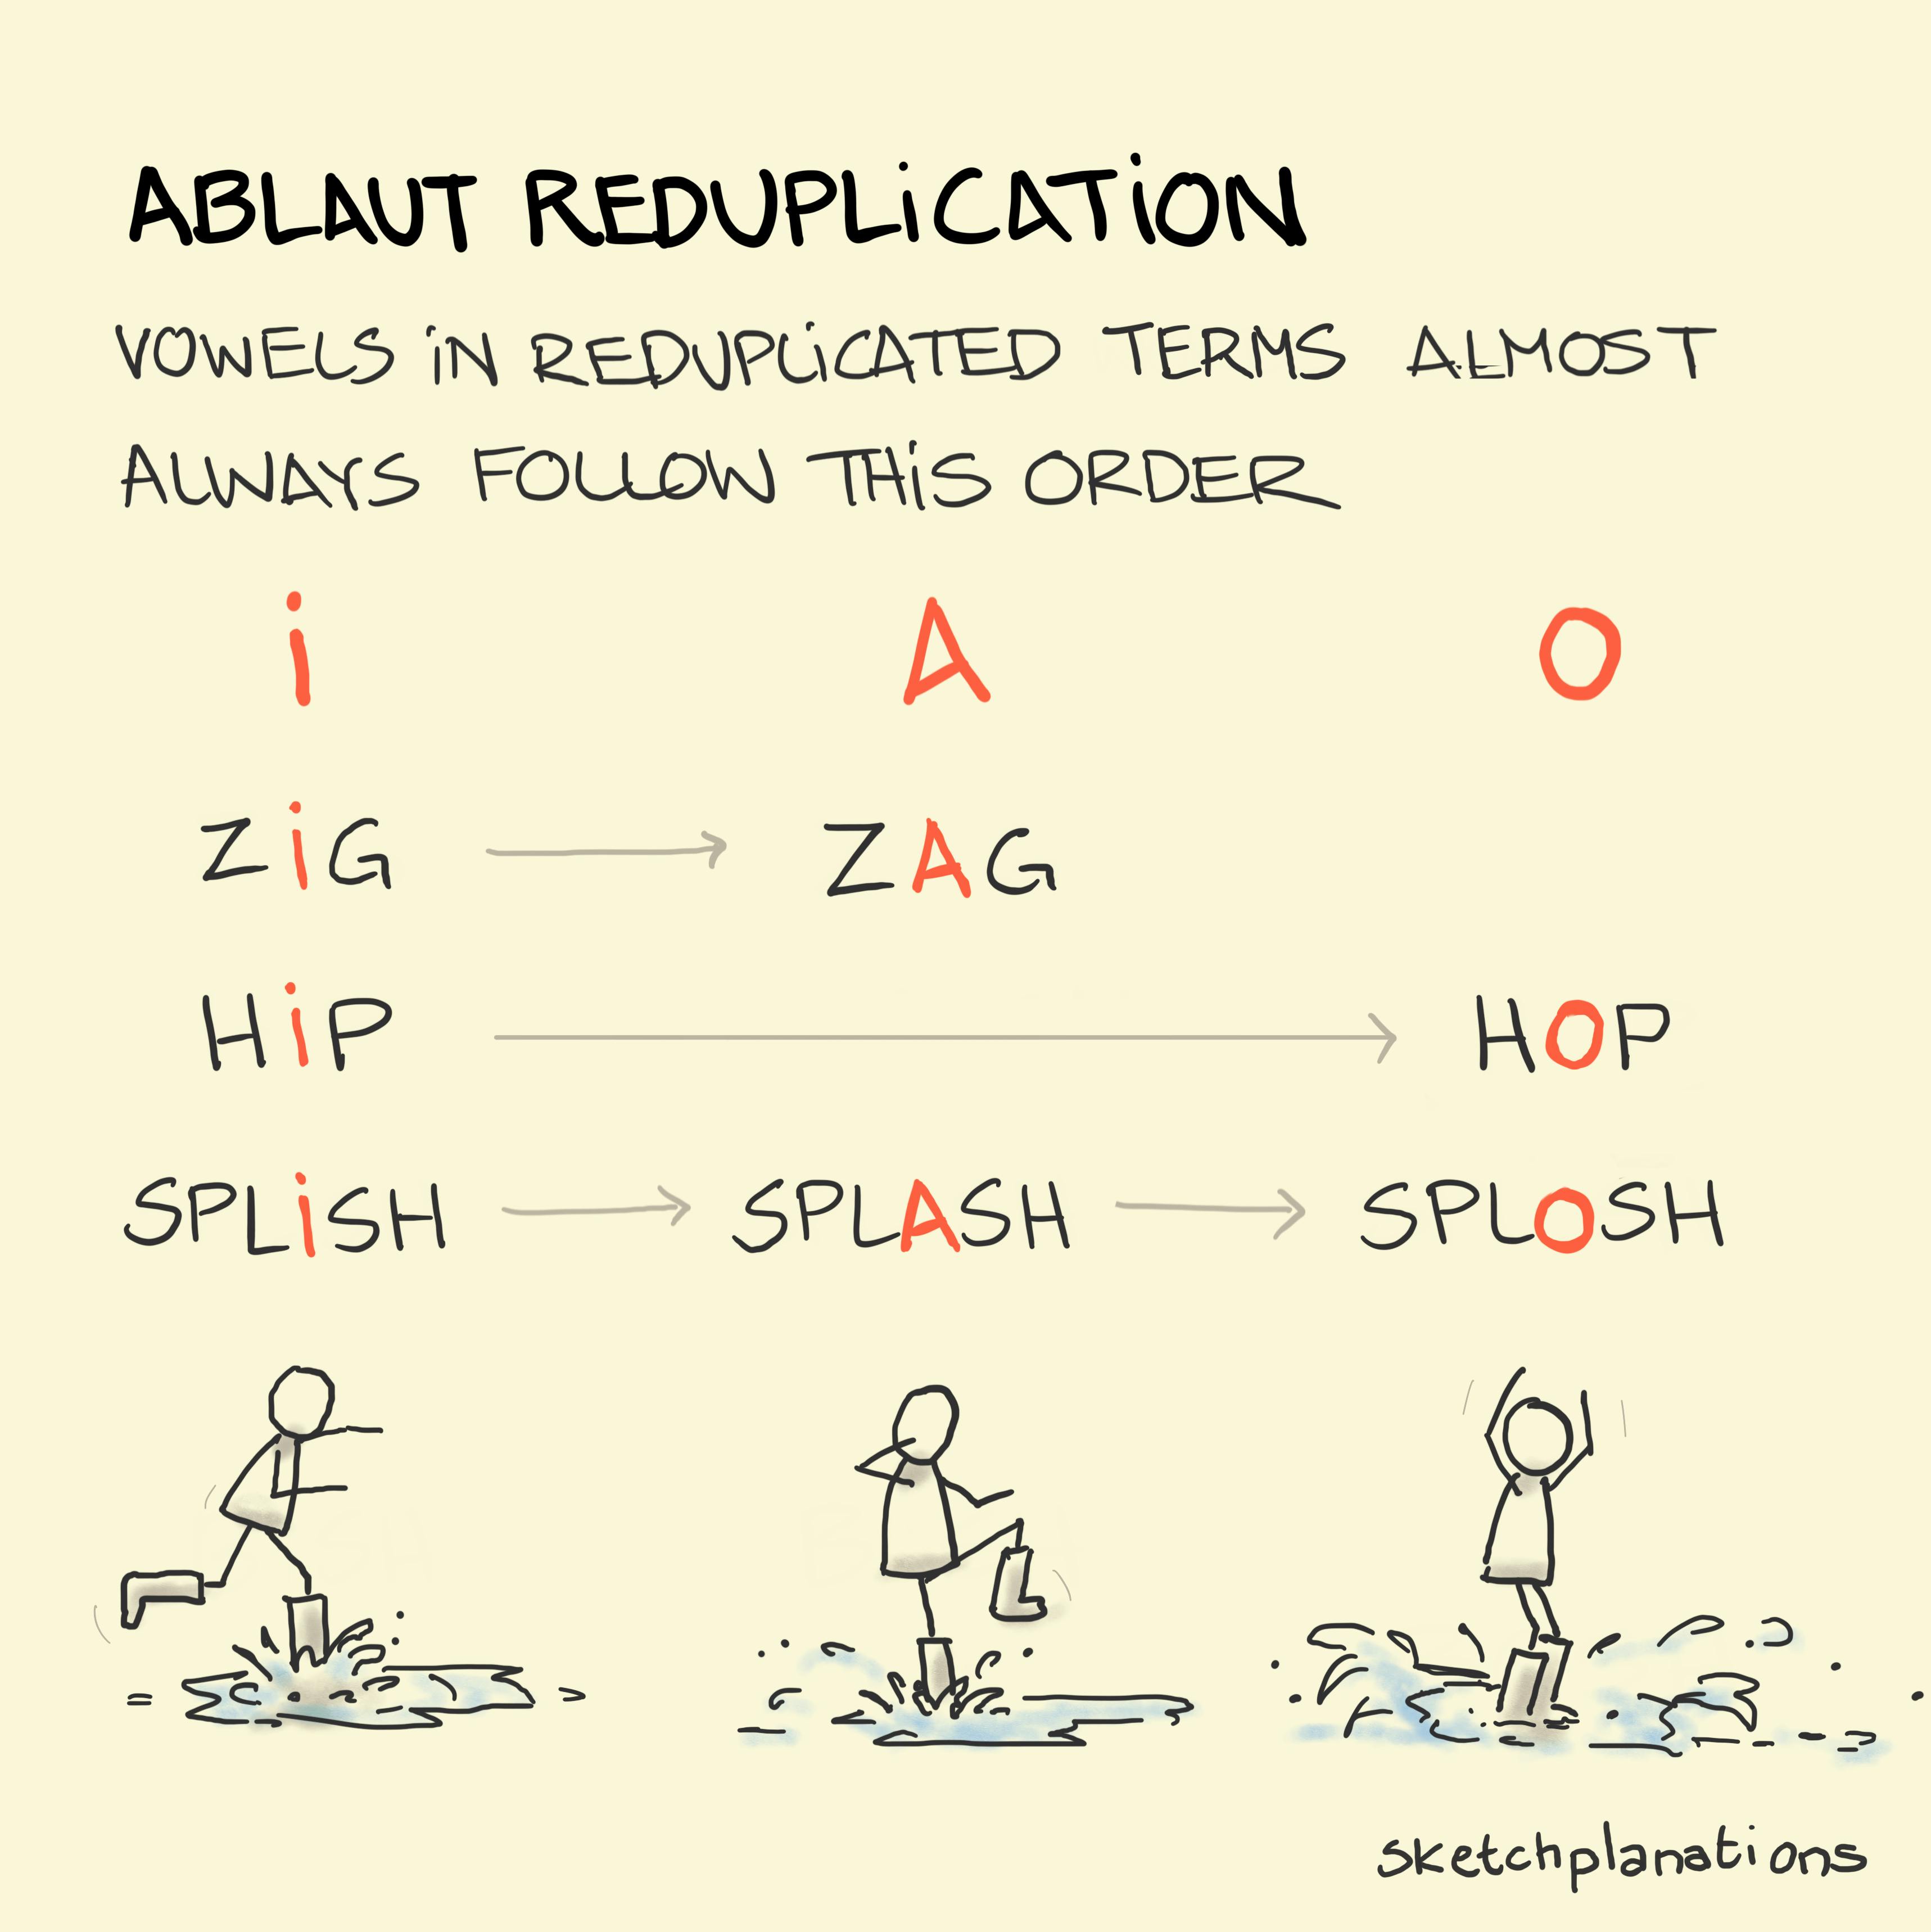 Ablaut reduplication illustration: showing the fascinating observation that reduplicated terms go i-a-o with someone splish-splash-sploshing and zig zag and hip hop